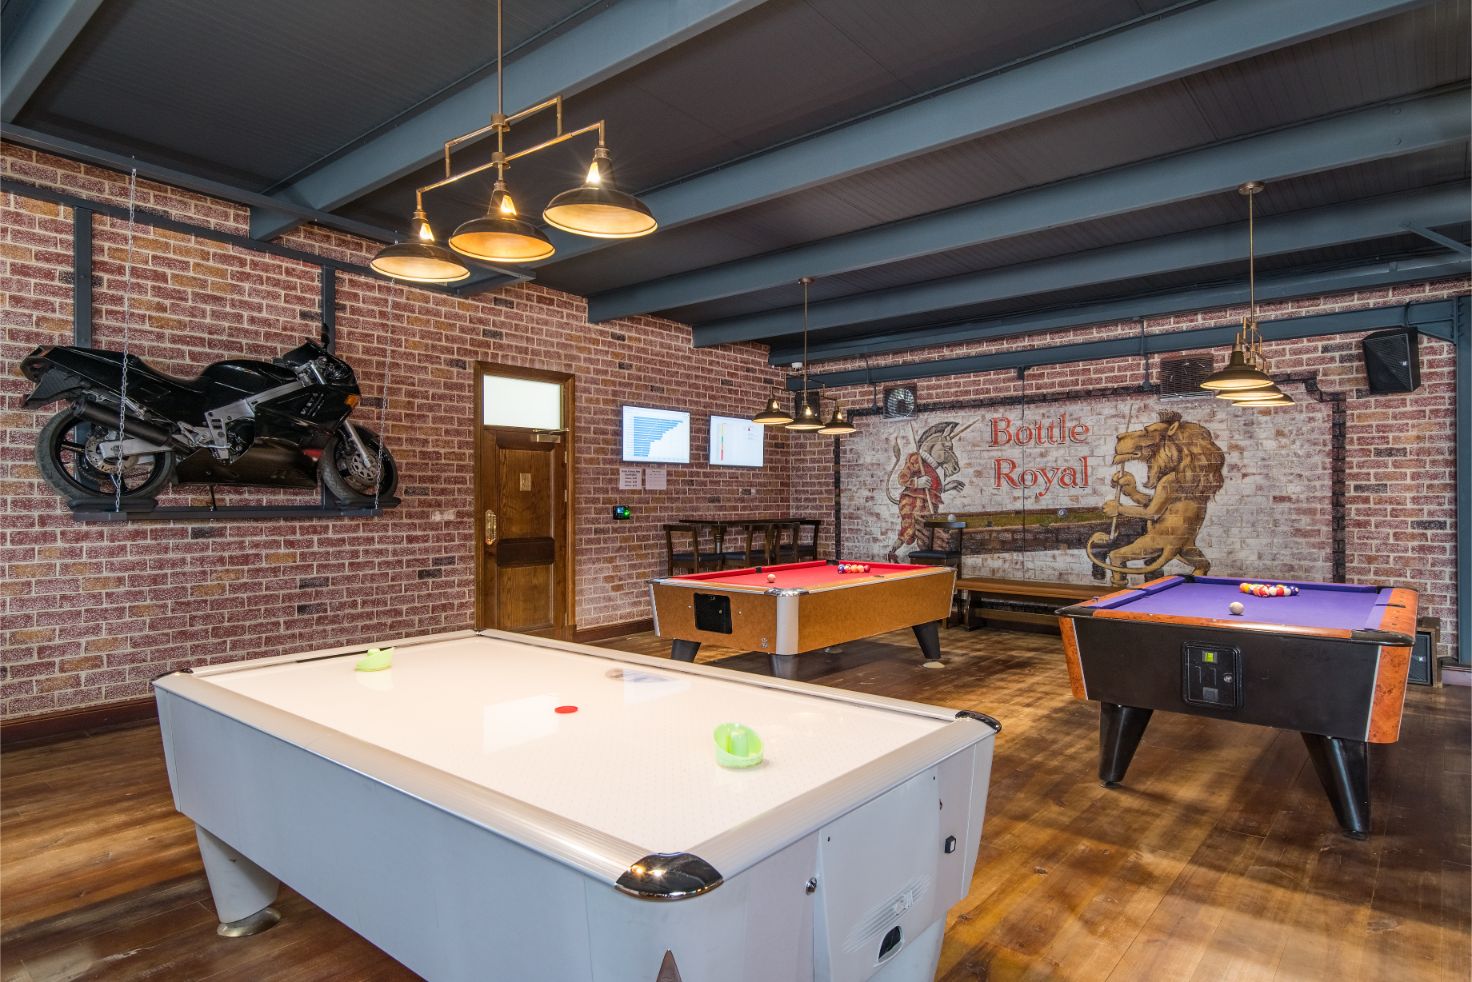 Pub Renovation UK of a staff canteen in the United Kingdom. Image shows pool tables and how we brought an element of fun to the staff canteen and a freshness